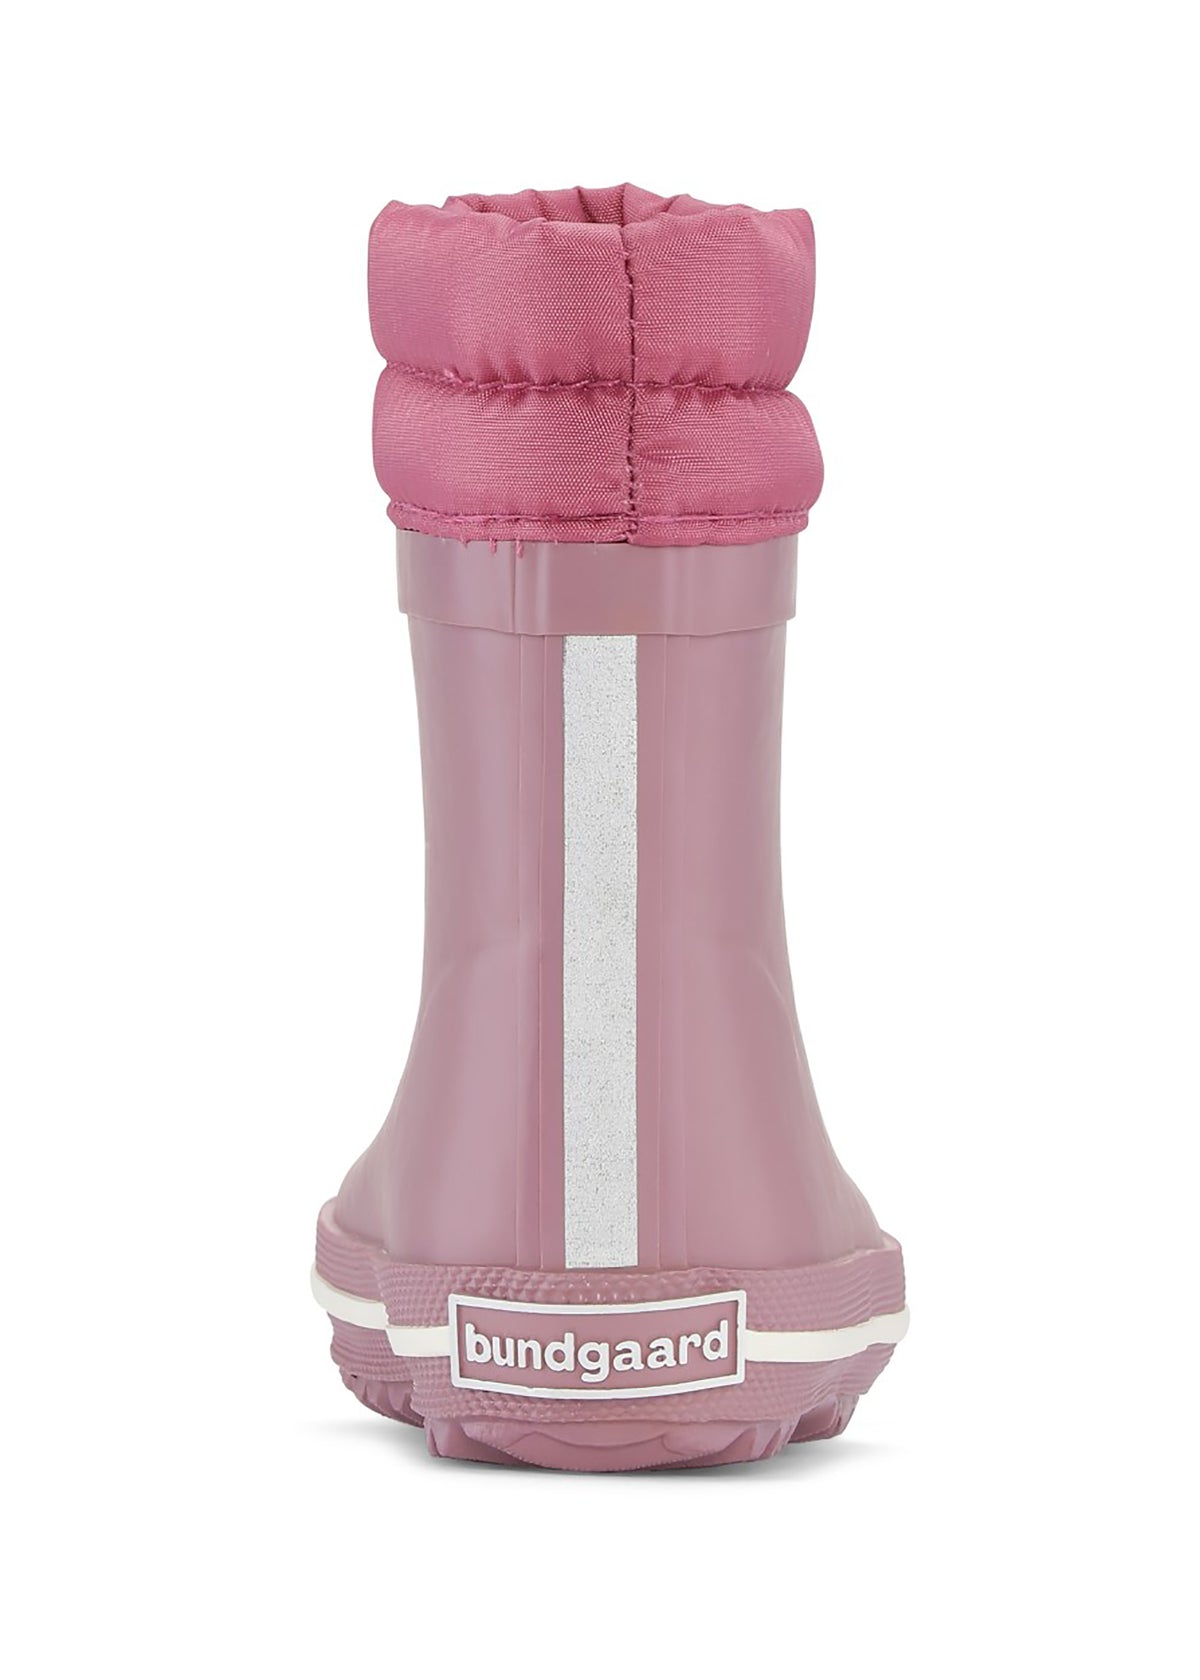 Rubber boots with a warm lining - dark pink, short shaft, drawstrings, Cirro Low Warm